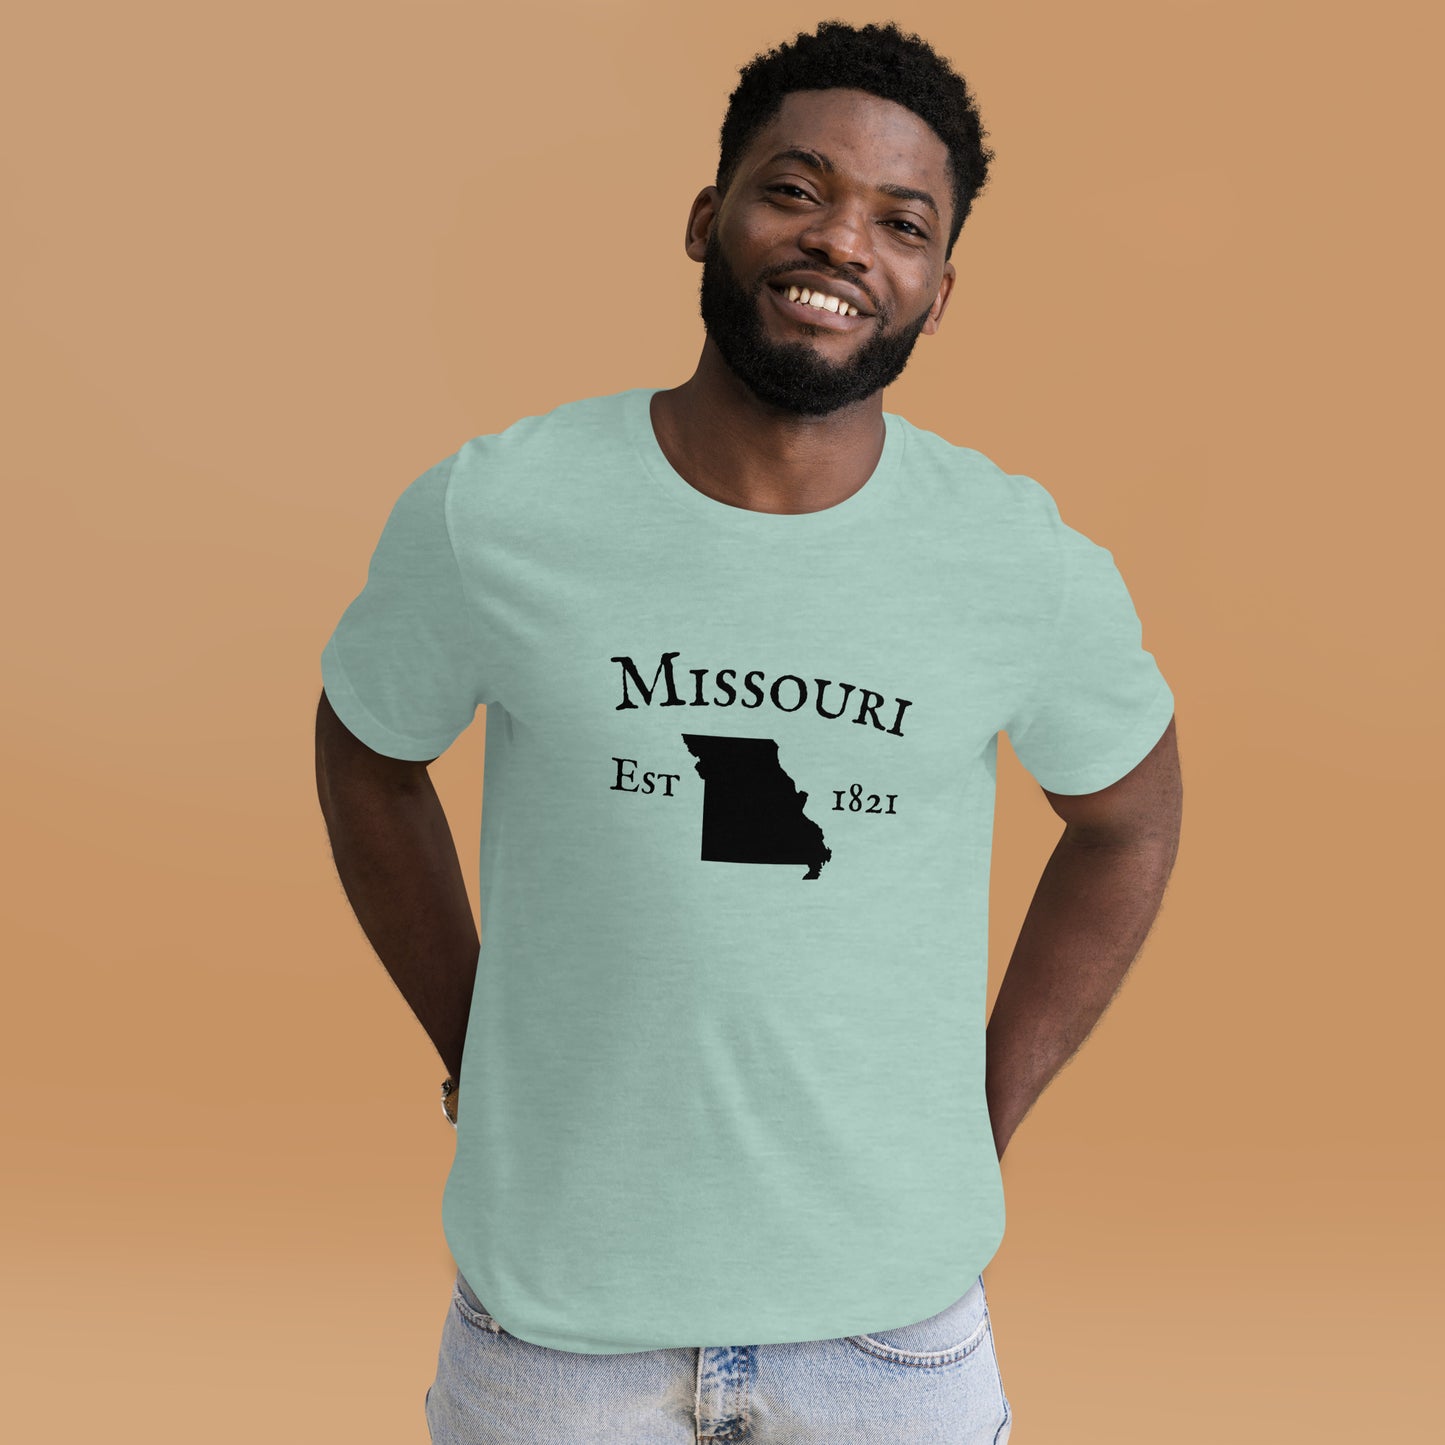 "Missouri Established In 1821" T-Shirt - Weave Got Gifts - Unique Gifts You Won’t Find Anywhere Else!